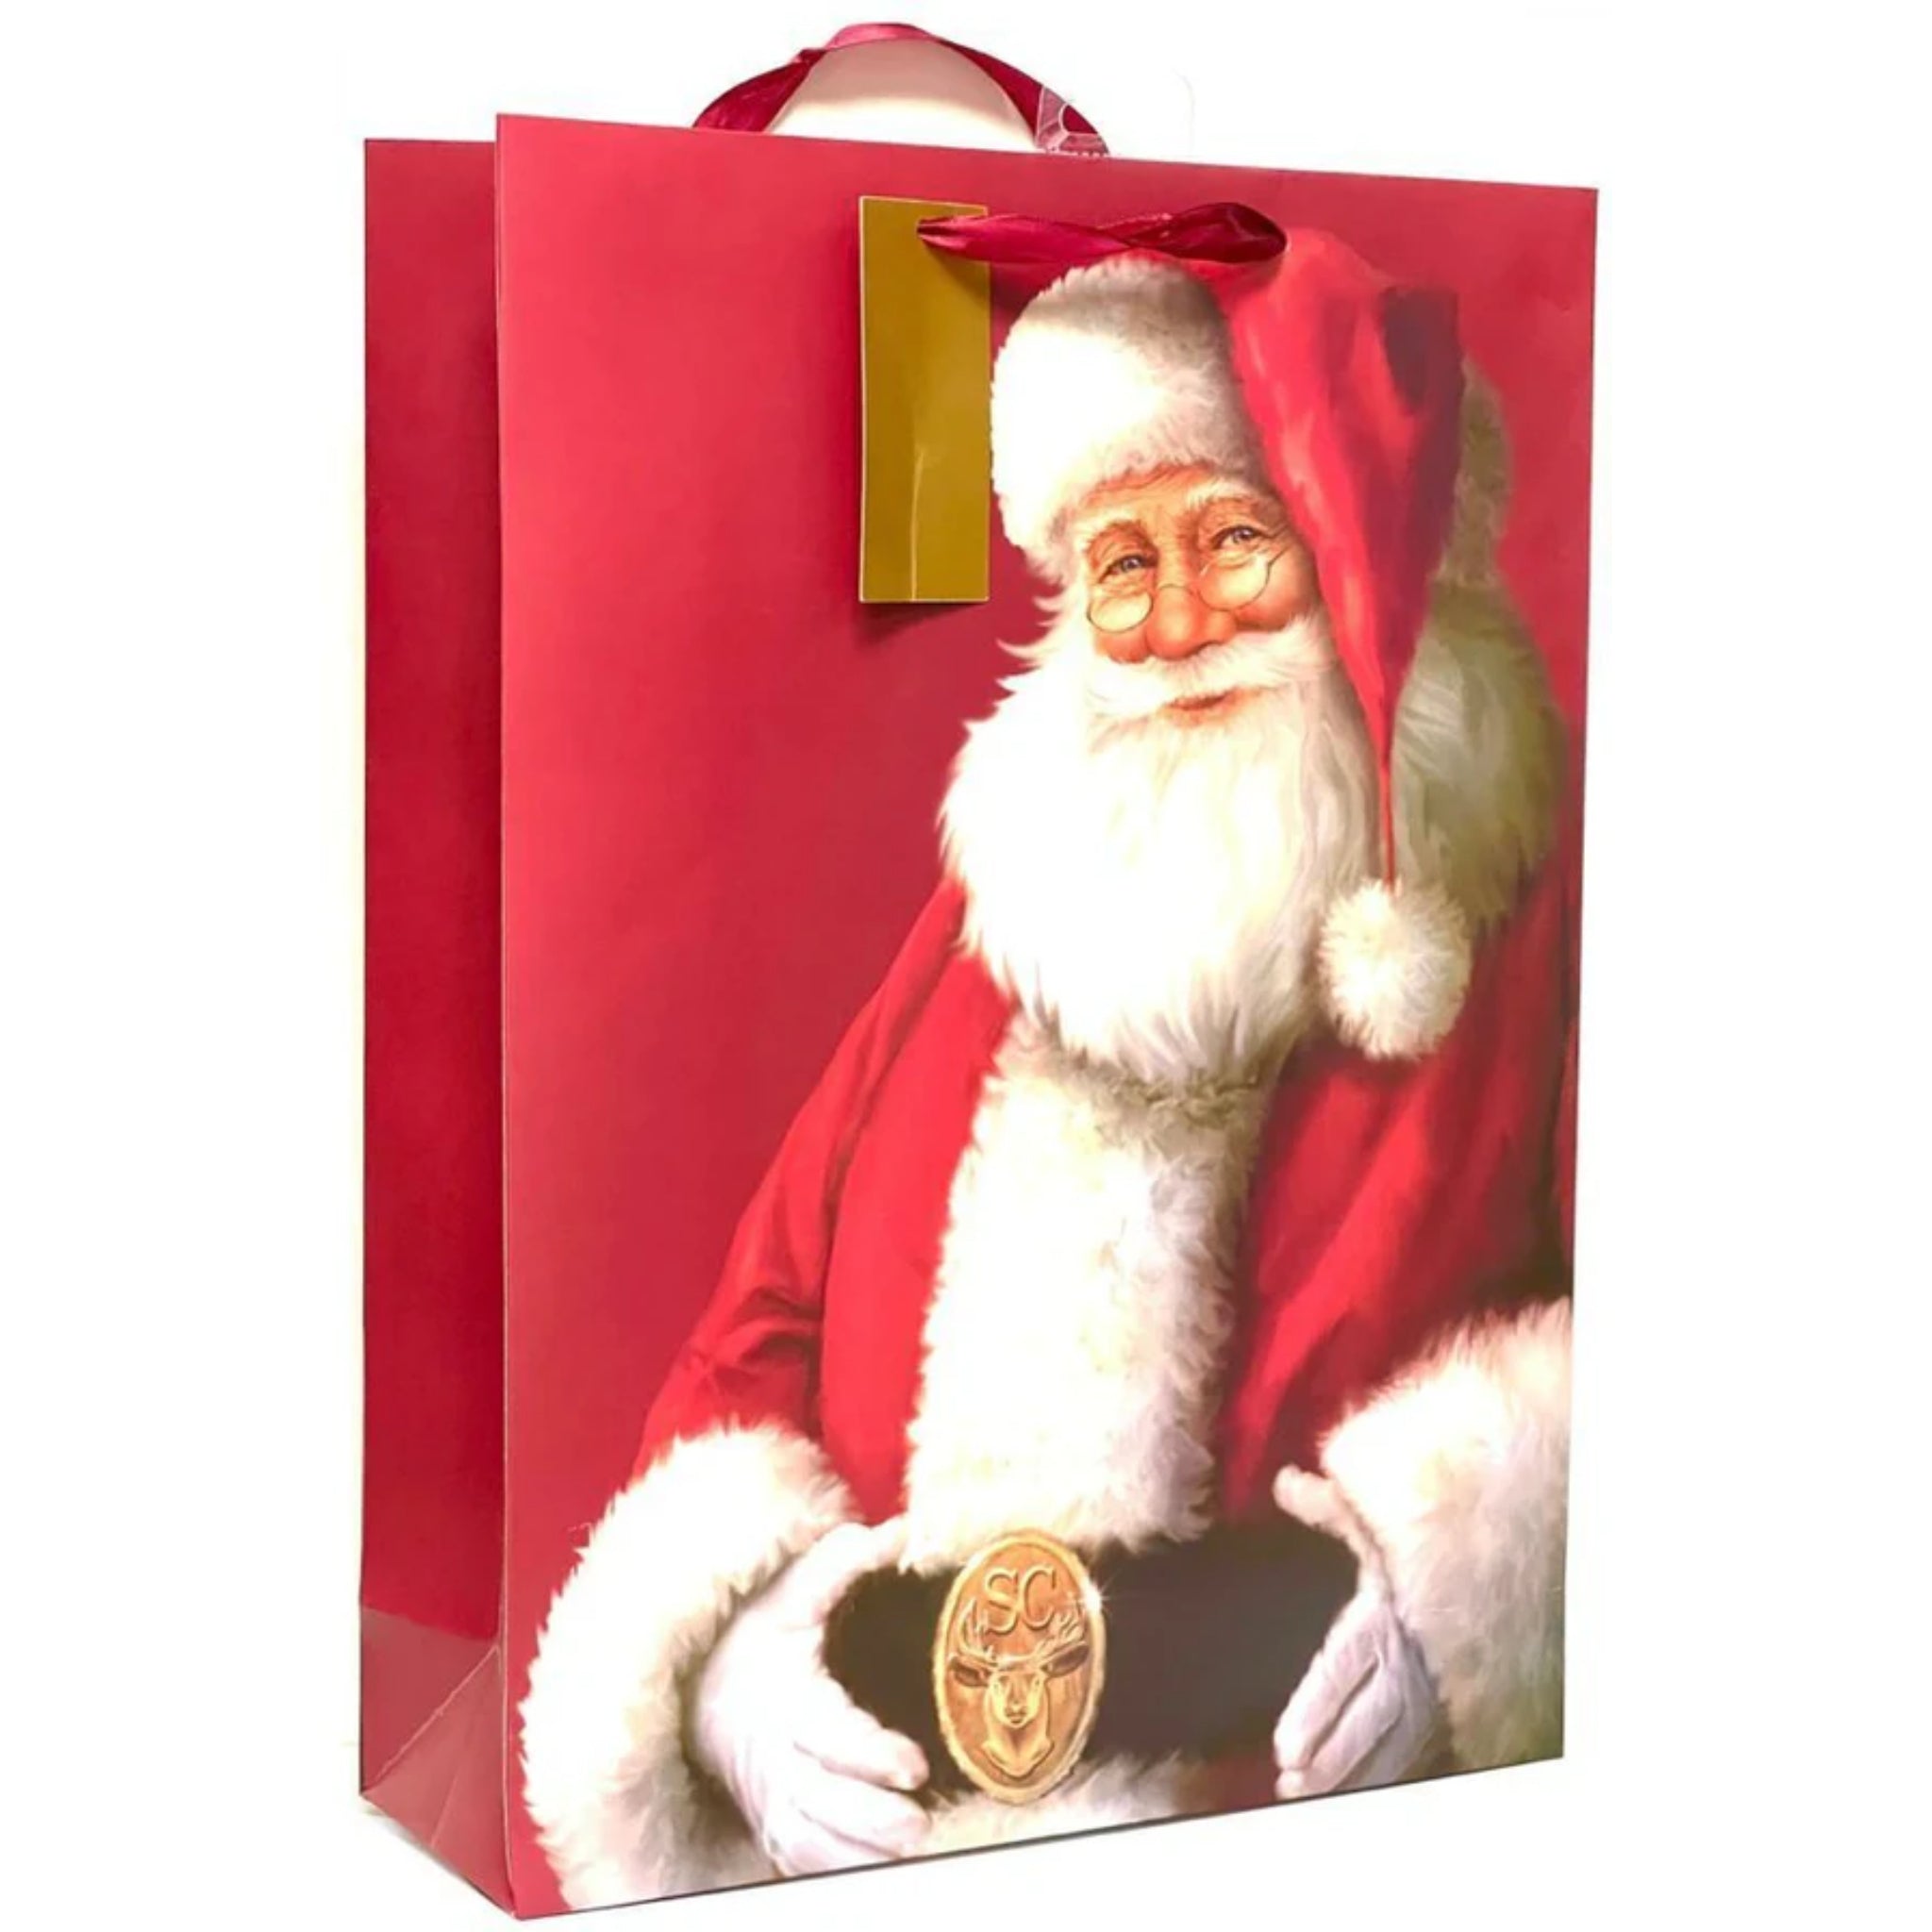 Beclen Harp 3pc Large/X Large/Small Luxury Christmas/Xmas Santa/HoHoHo/Merry&Bright Print Bags With Ribbon And Tag